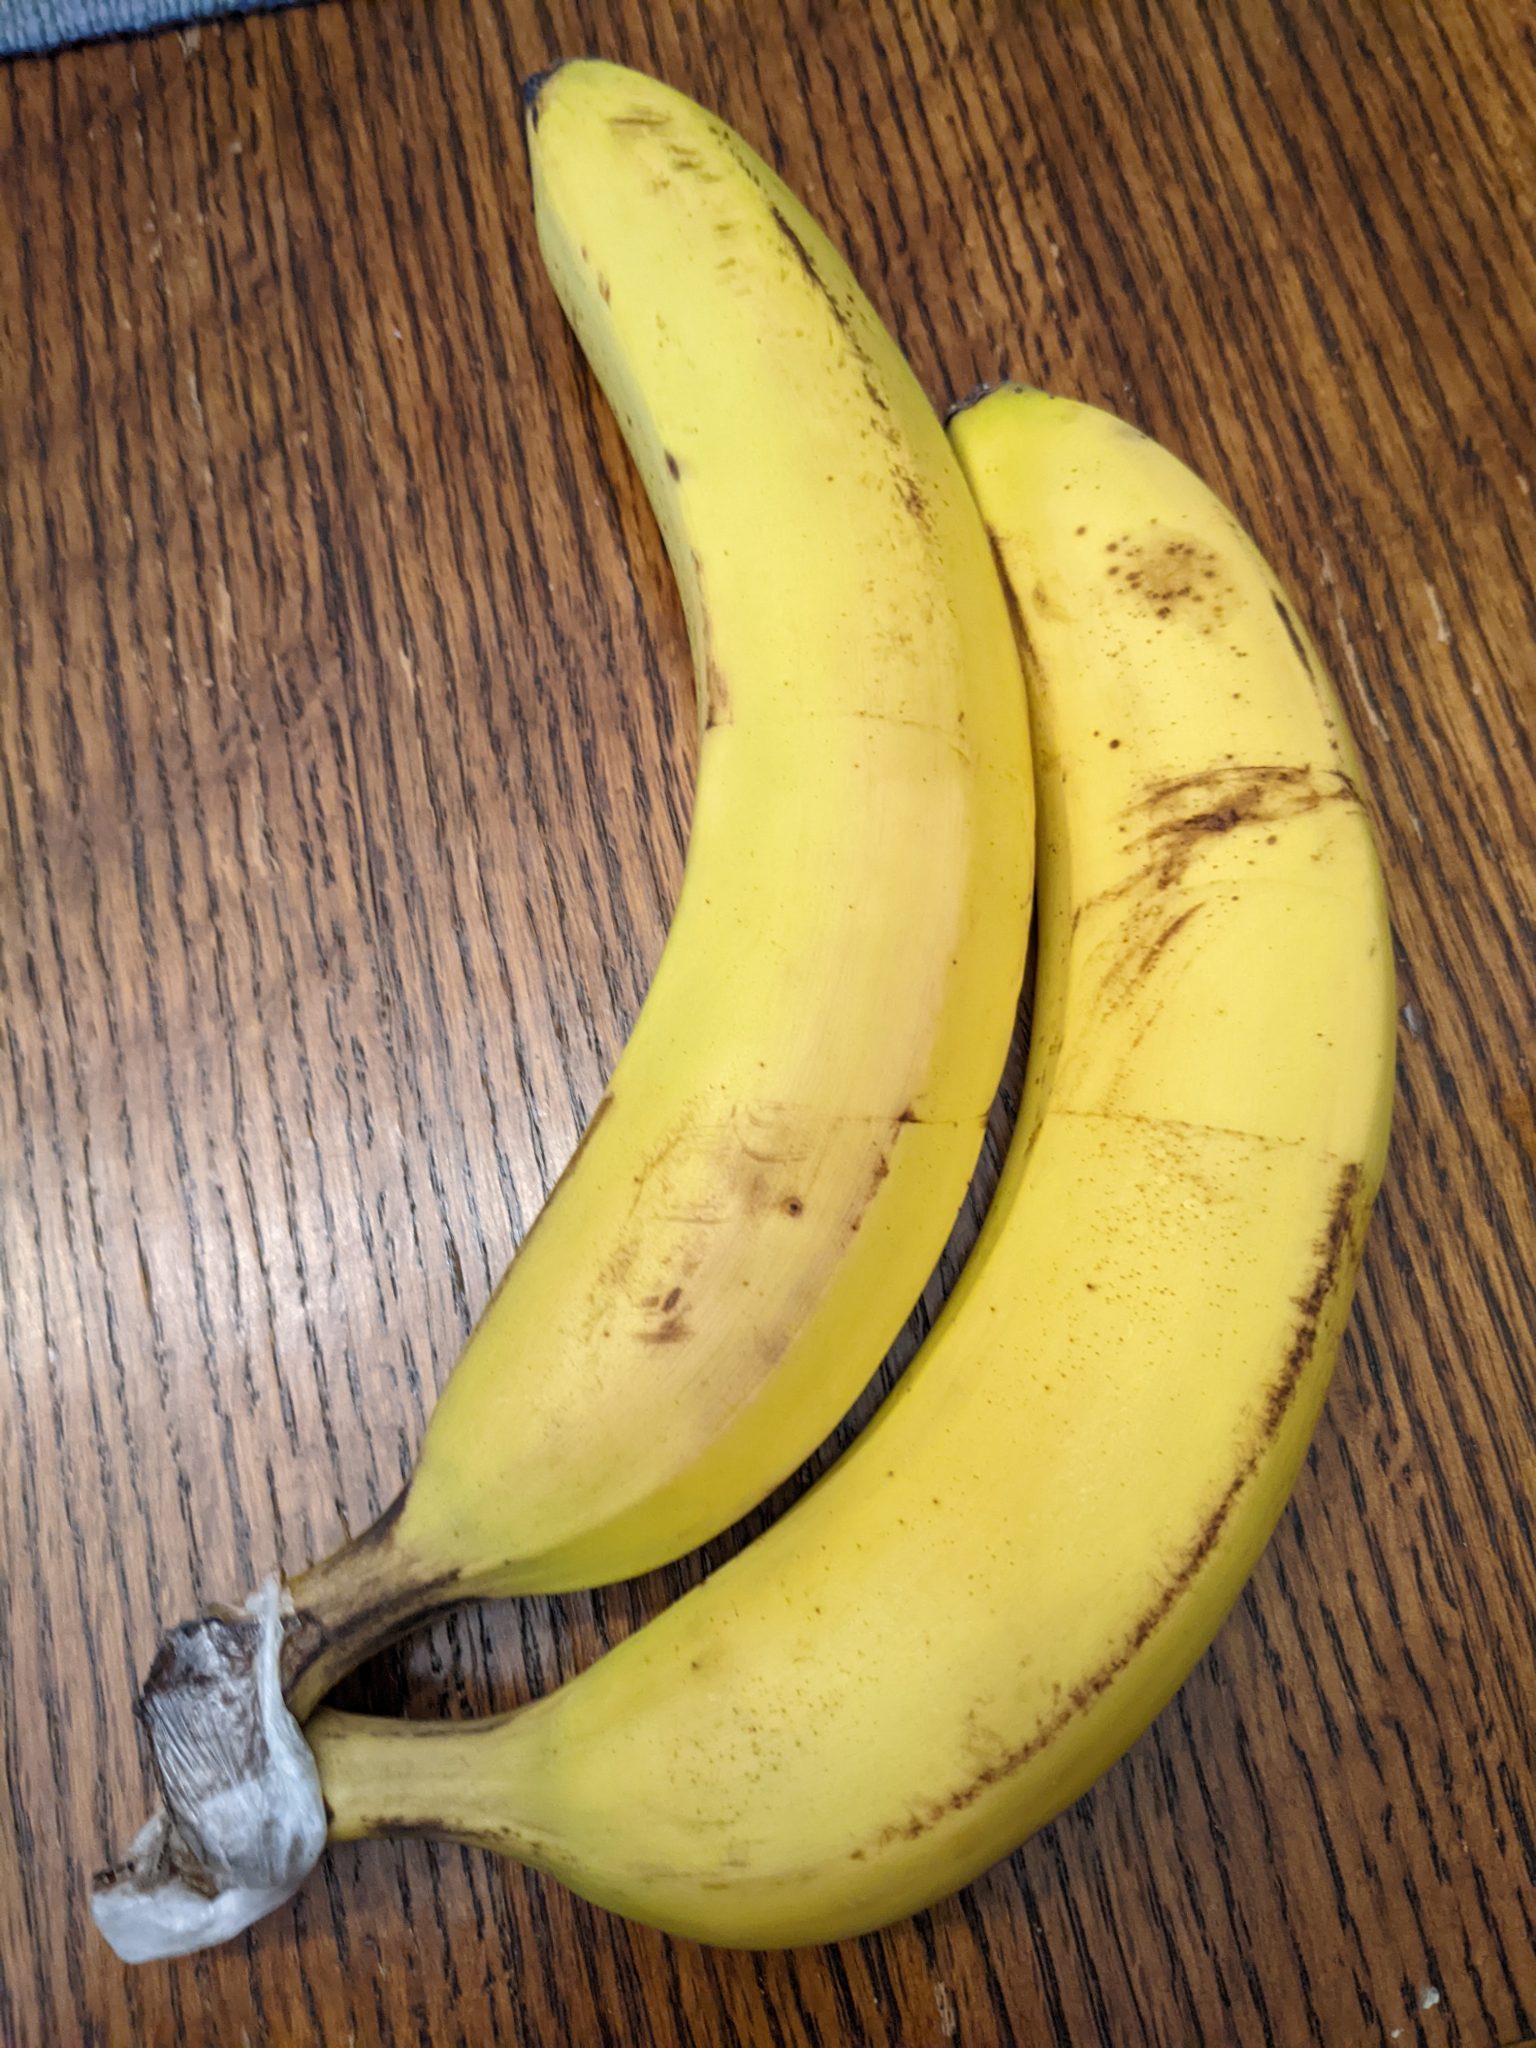 Two bananas on a table